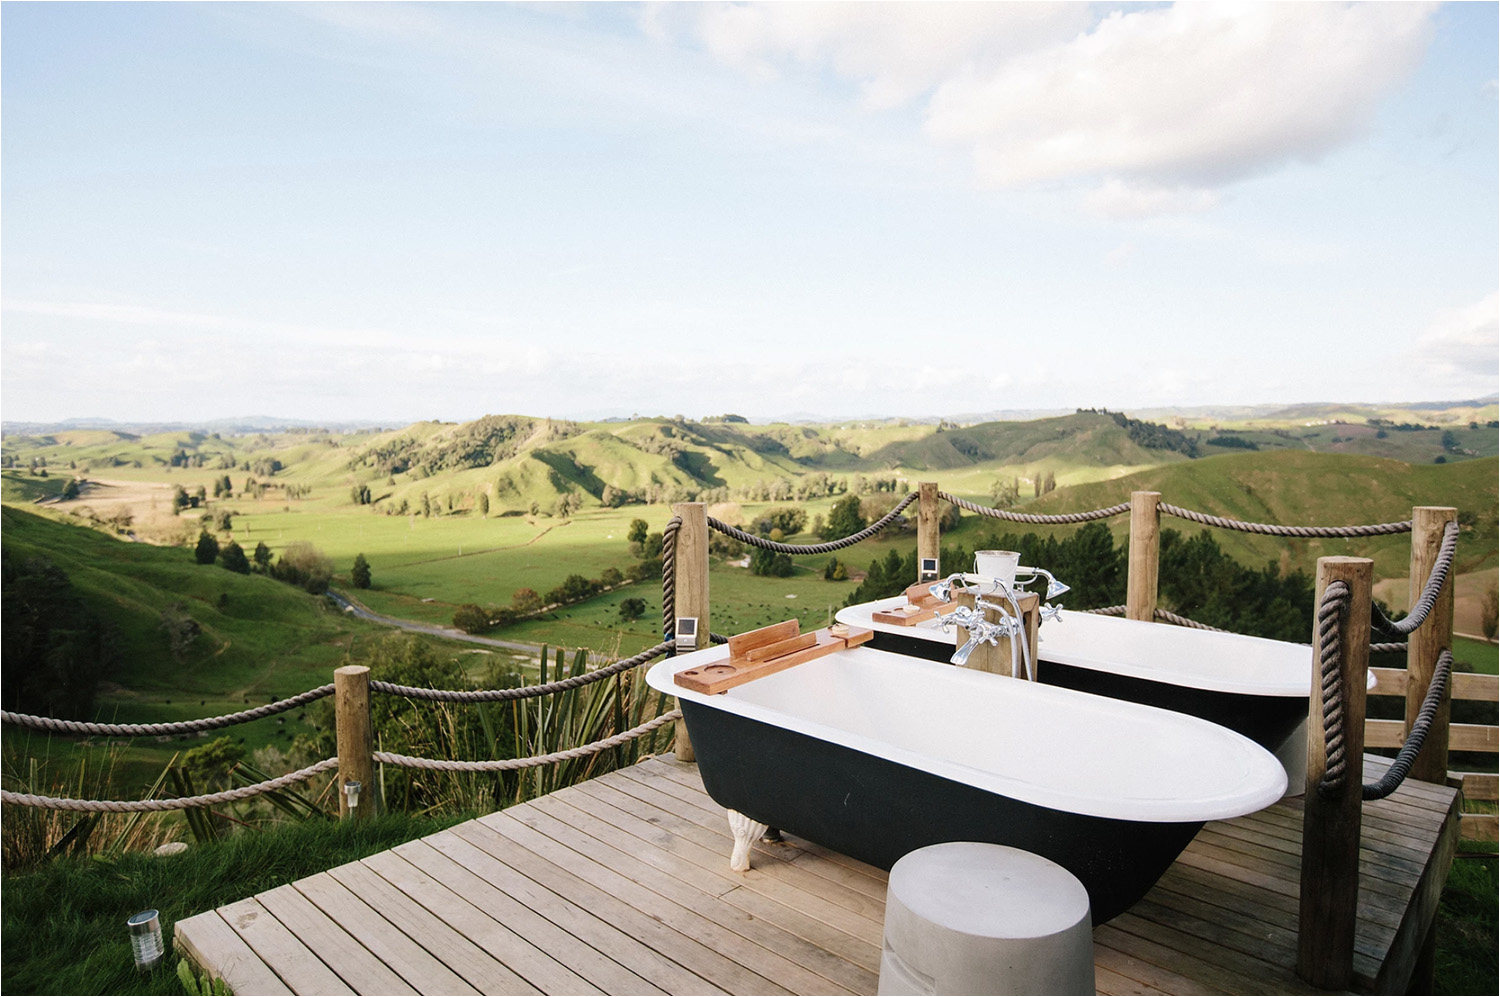 Bathtubs New Zealand the Most Incredible Bathtubs From Around the World • the